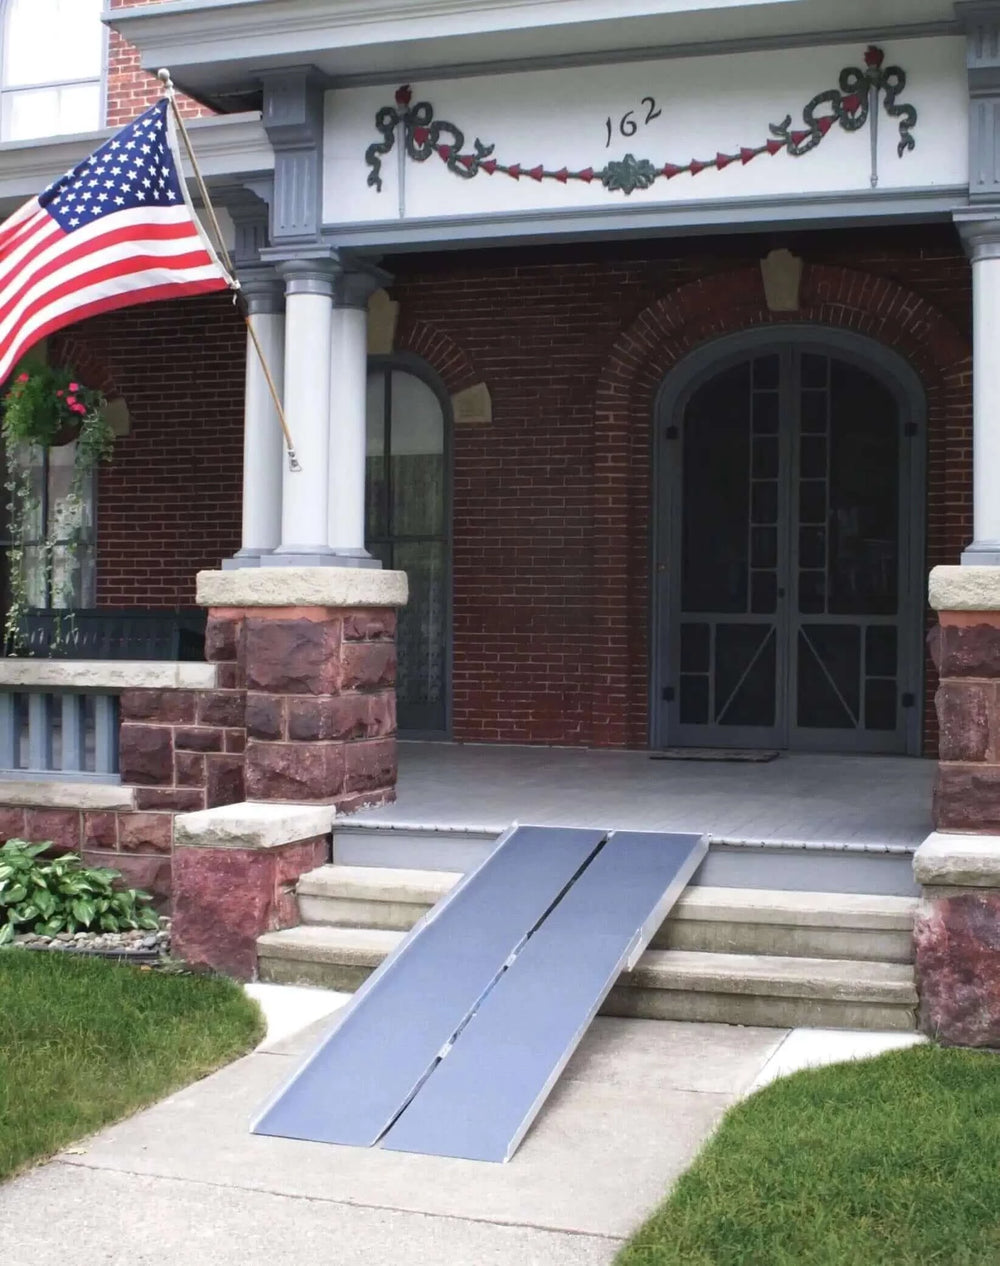 Alumiramp - AlumiLite Ready Wheelchair Ramp - zoomed in at house's front entrance